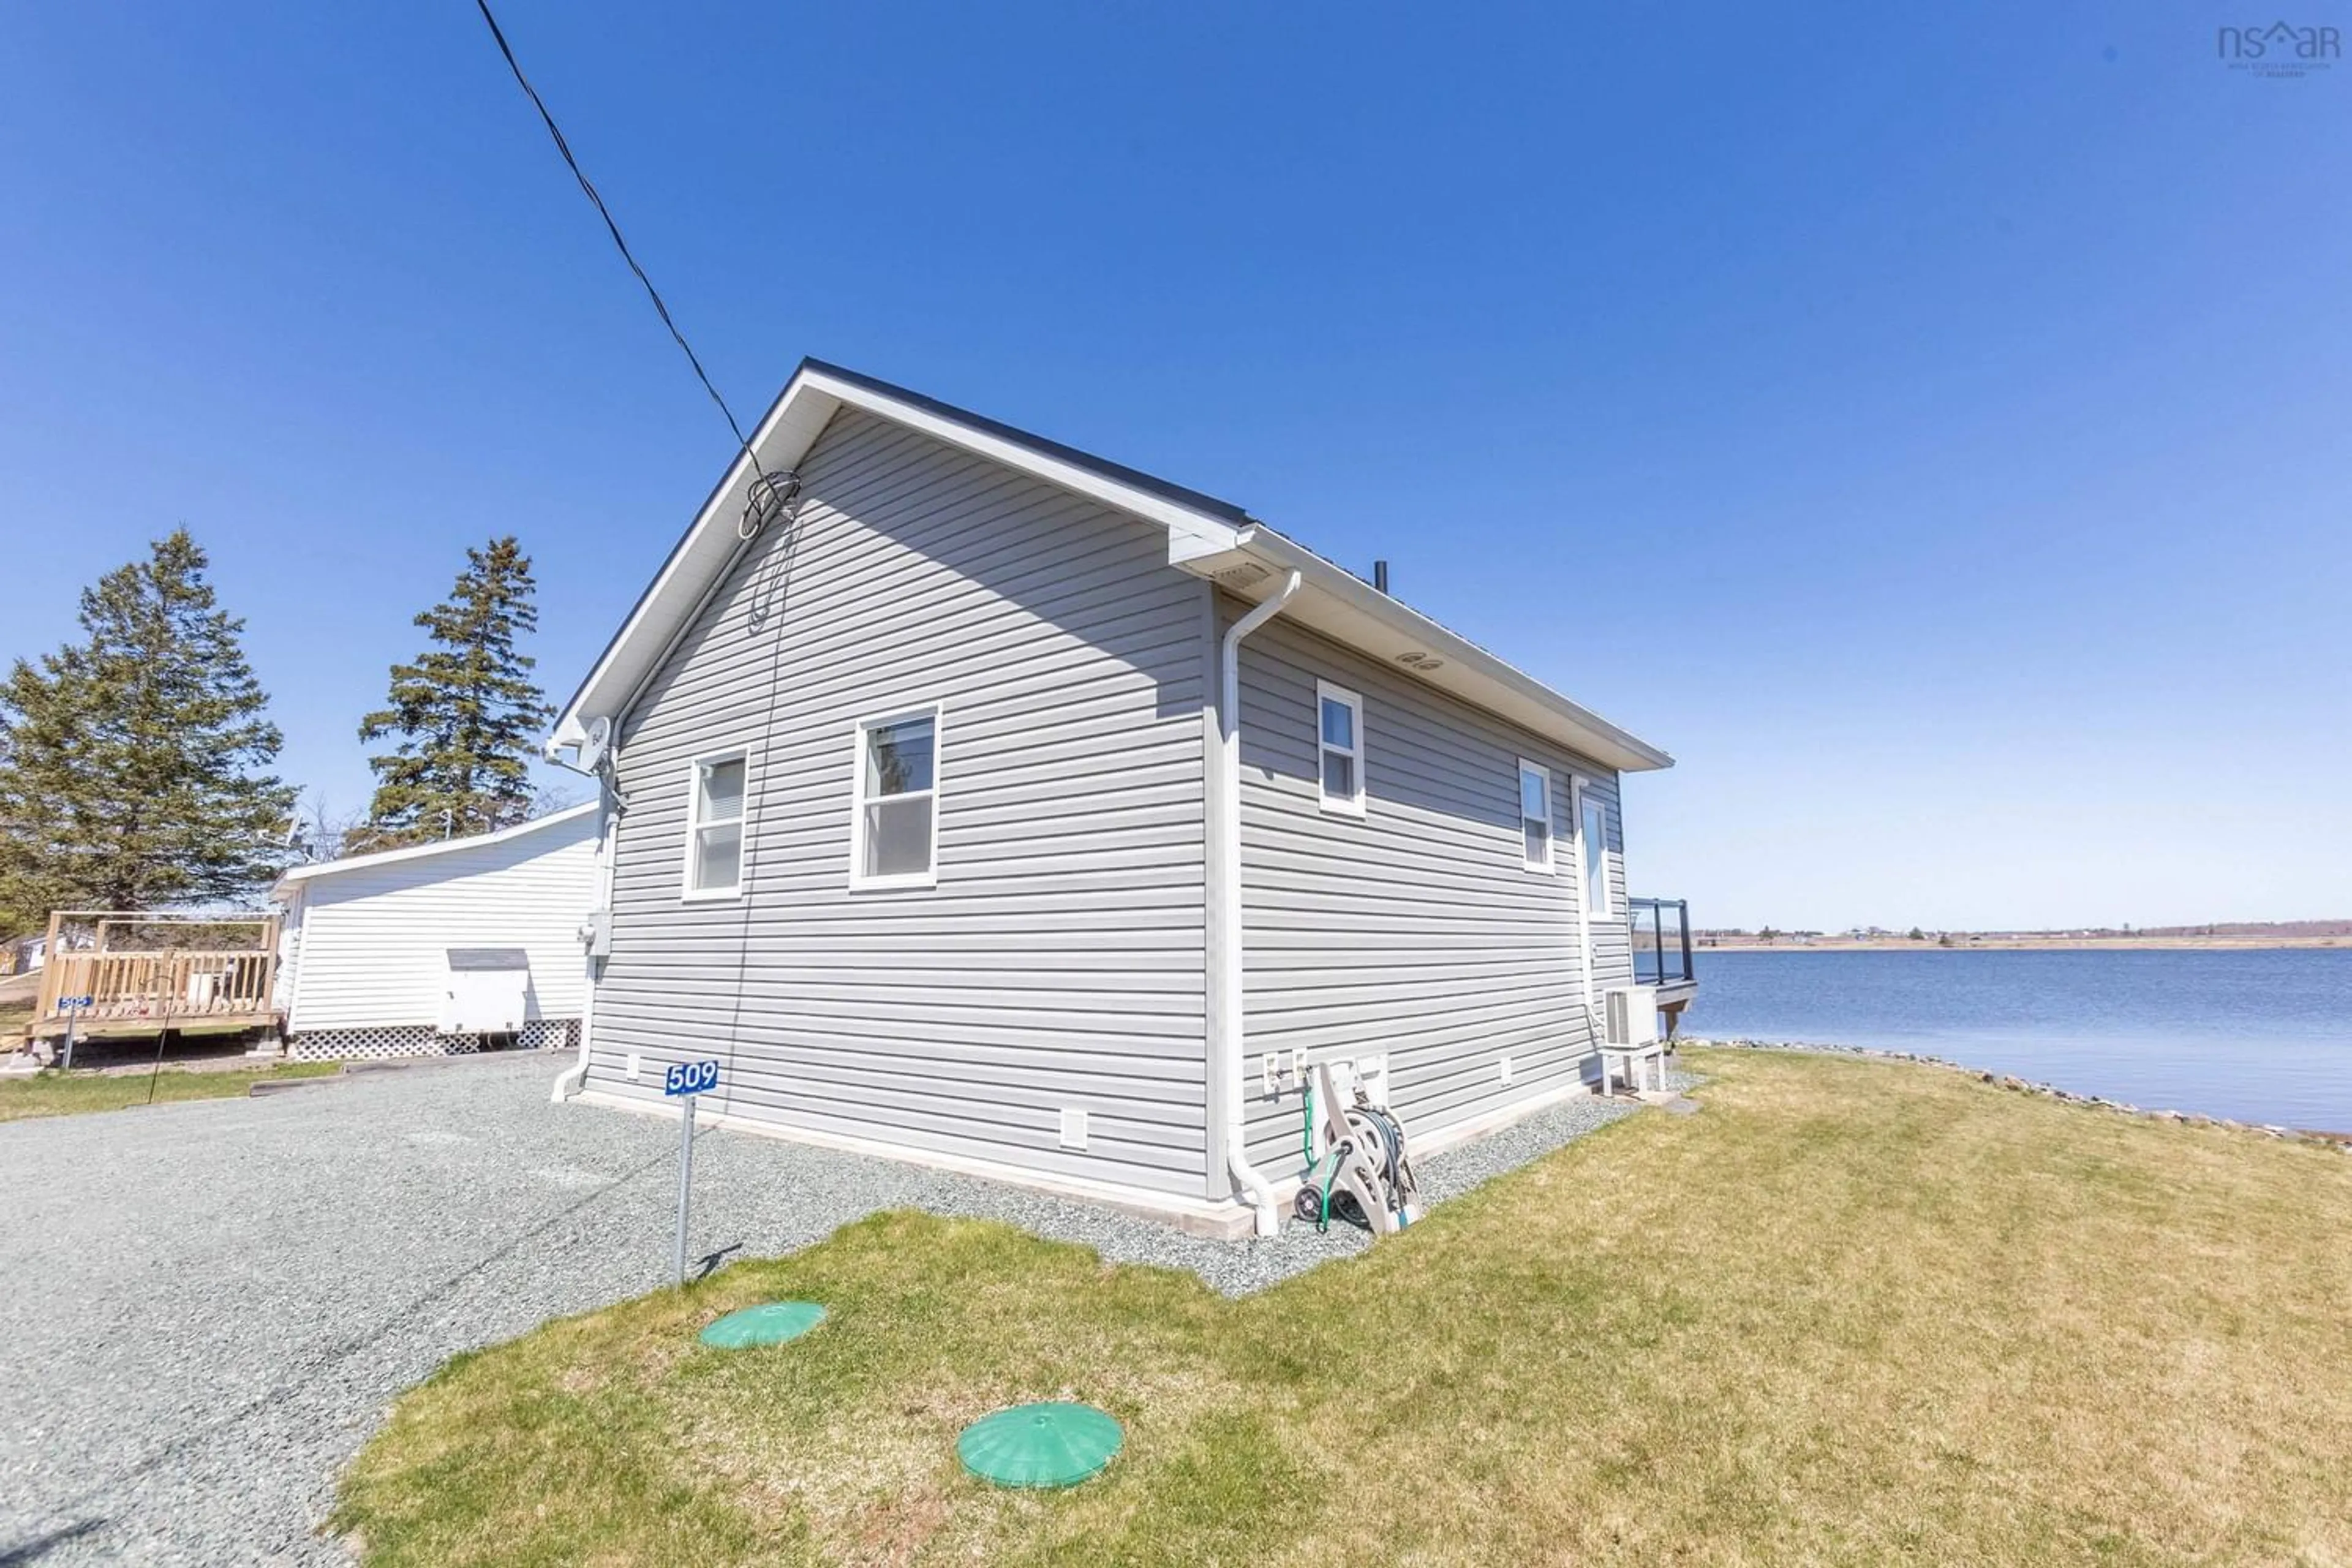 A pic from exterior of the house or condo for 509 Bridgeview Lane, Port Philip Nova Scotia B0K 1L0